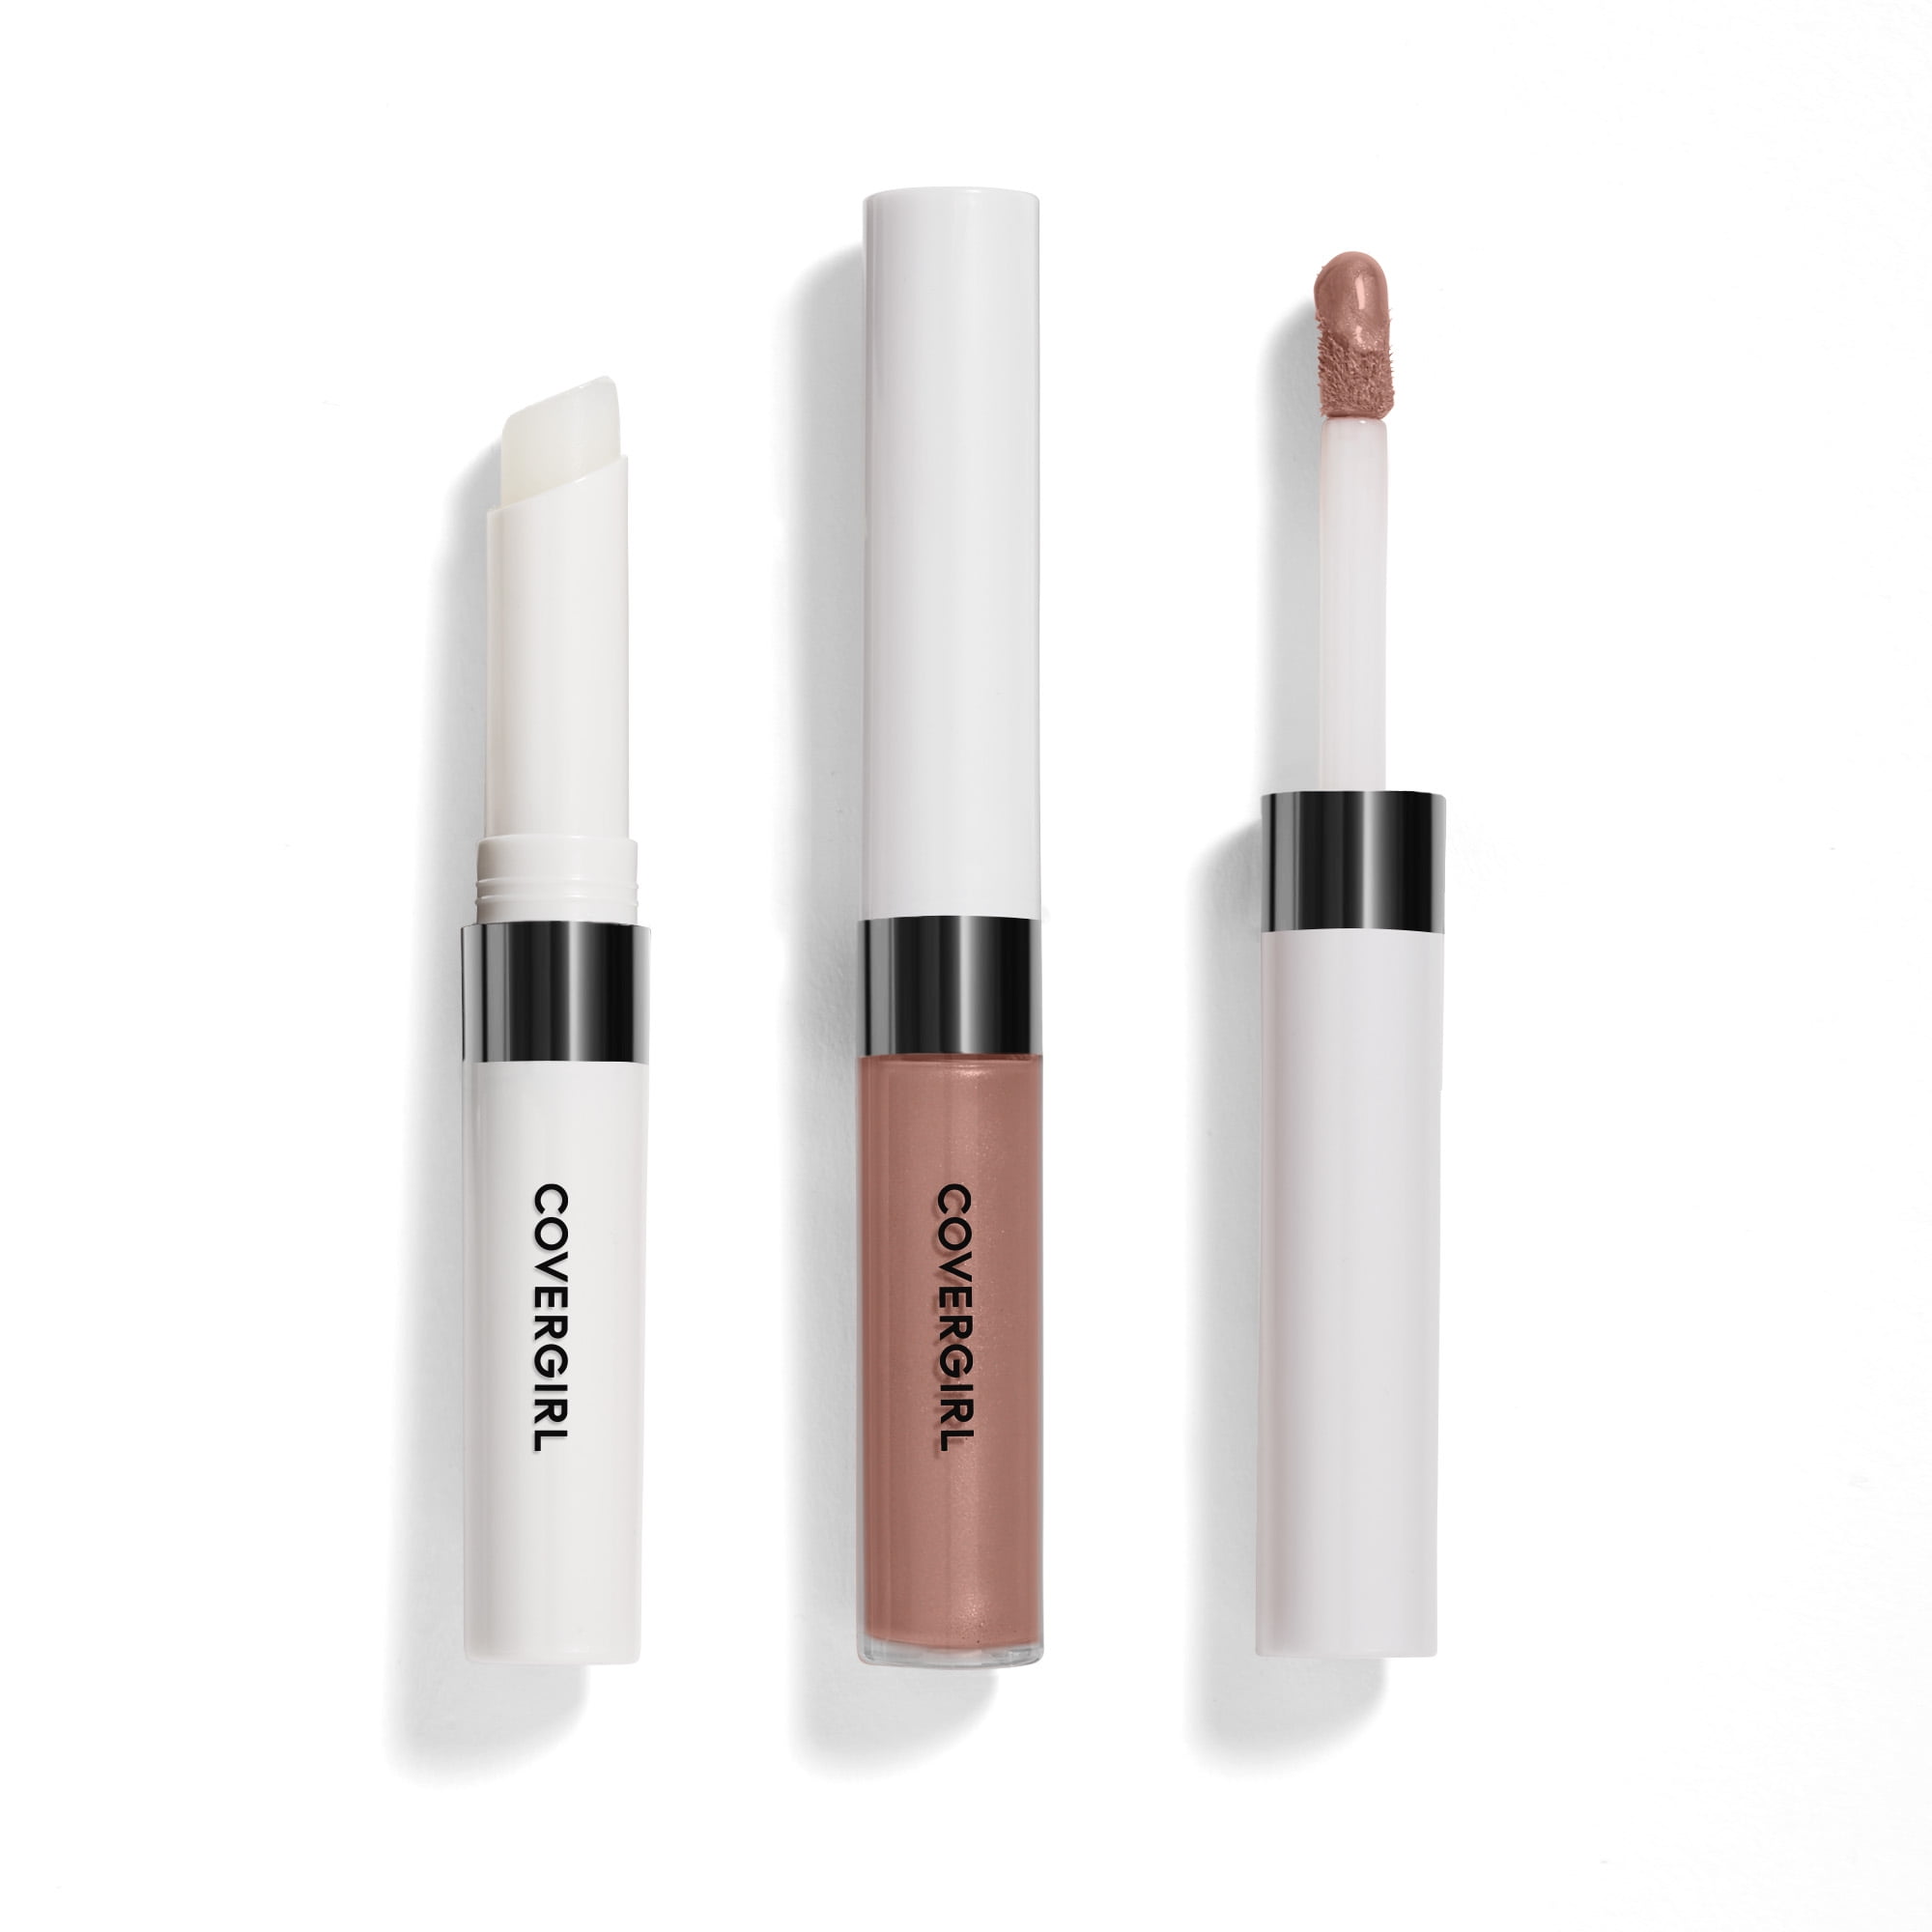 COVERGIRL Outlast All-Day Lip Color Liquid Lipstick And Moisturizing Topcoat, Longwear, Spiced Latte, Shiny Lip Gloss, Stays On All Day, Moisturizing Formula, Cruelty Free, Easy Two-Step Process